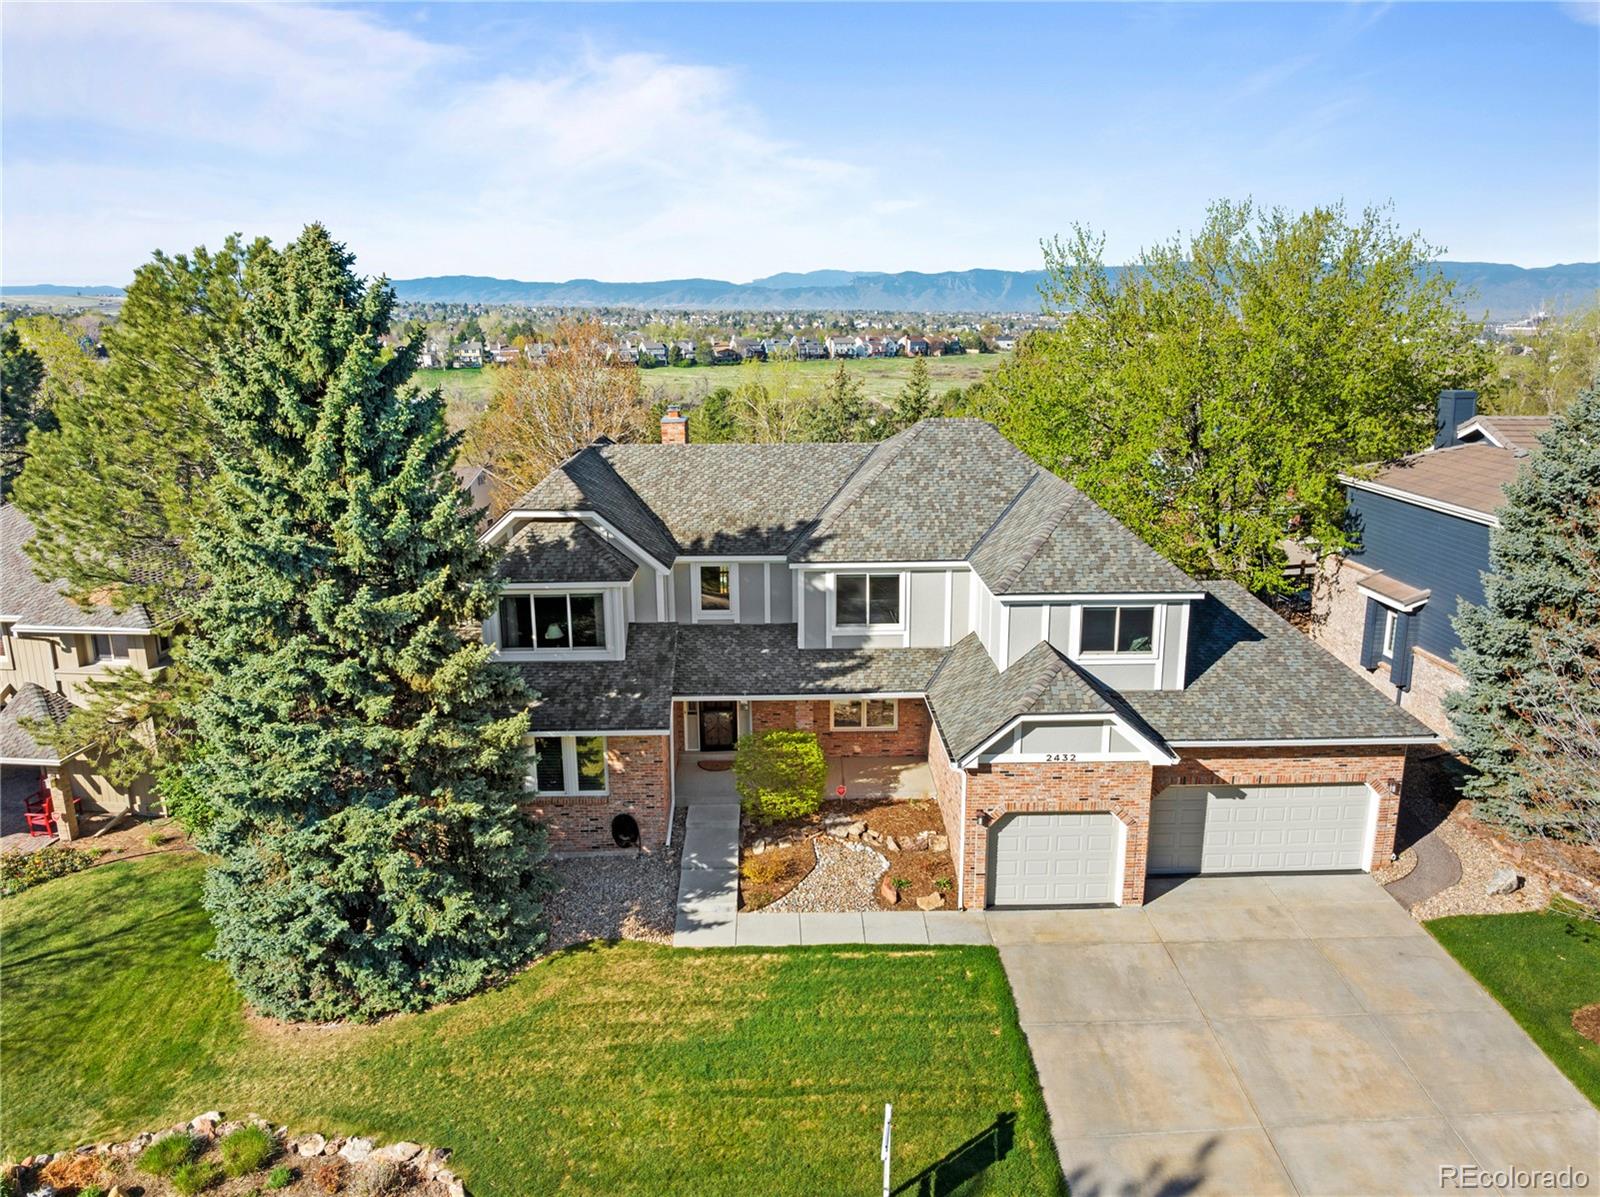 View Highlands Ranch, CO 80126 house